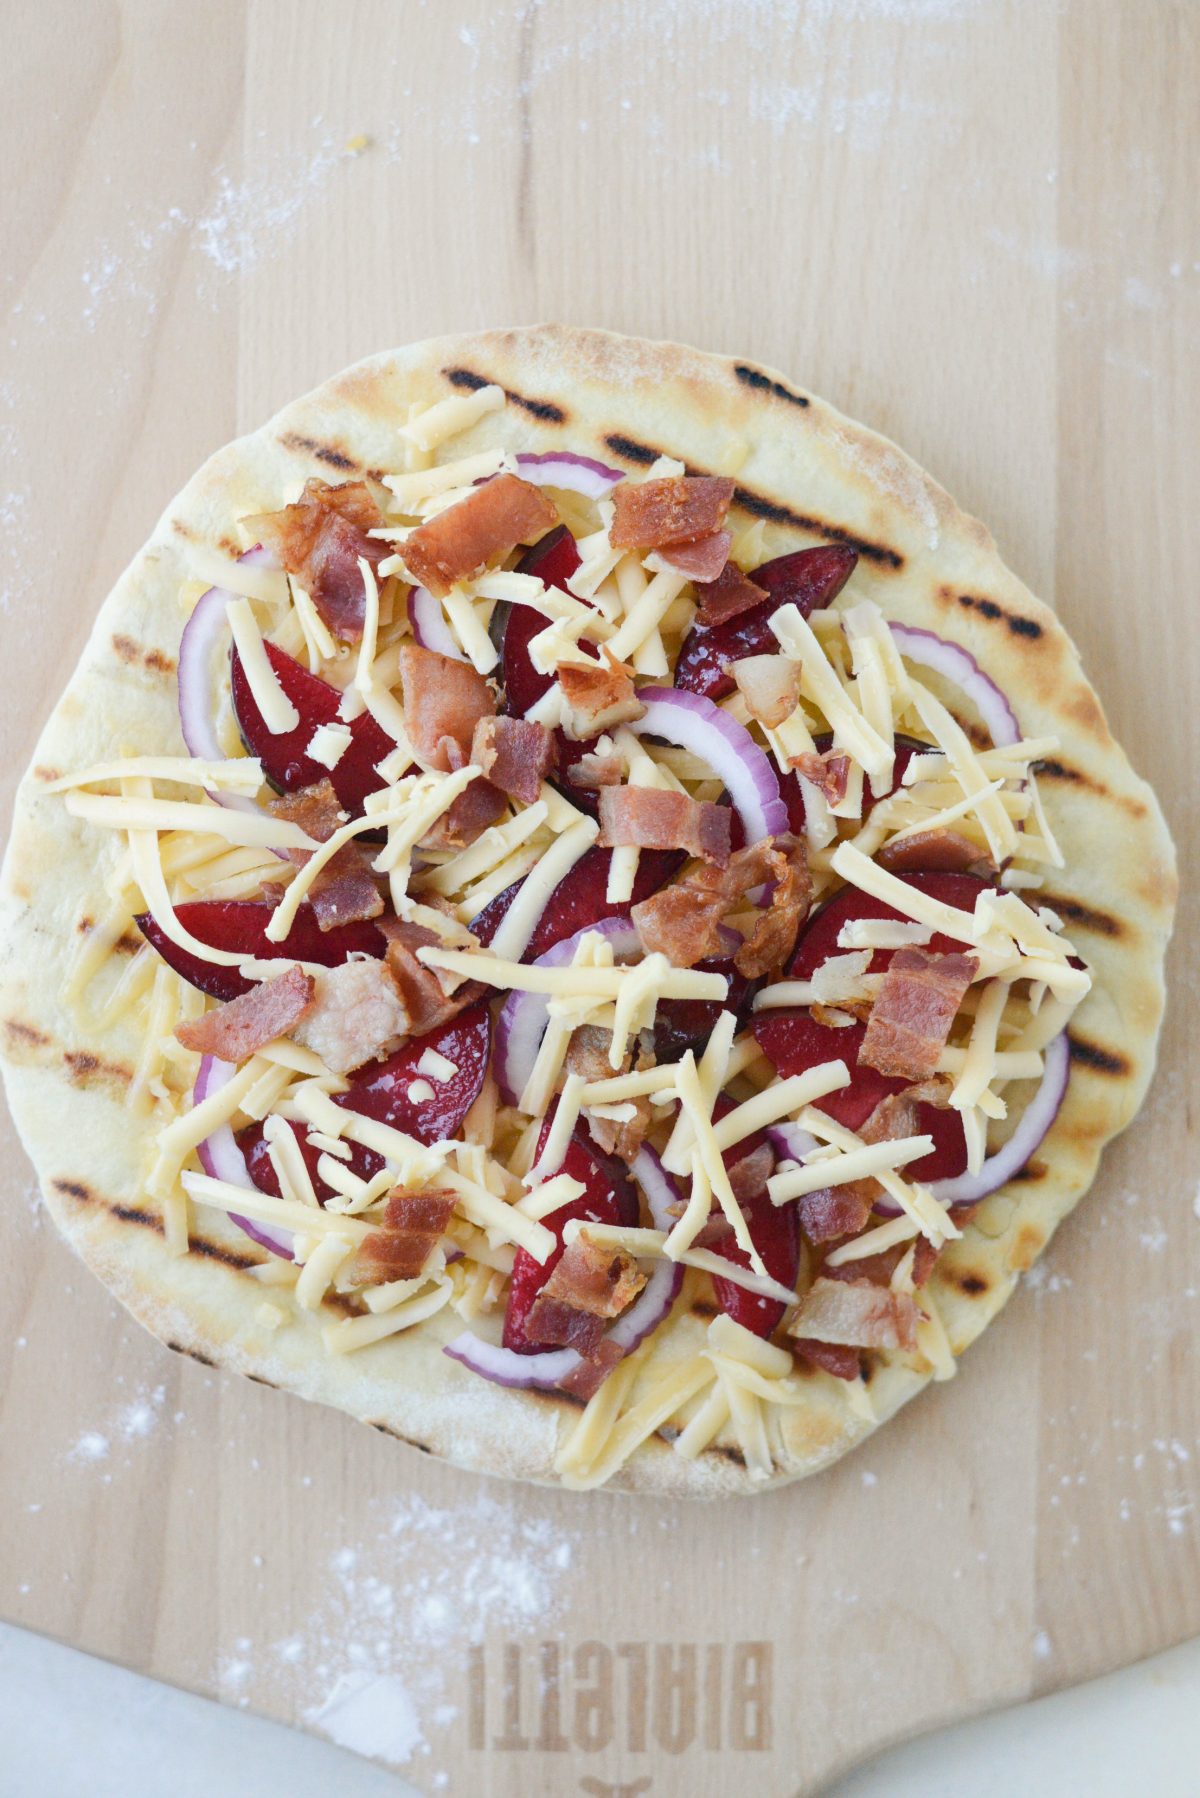 grilled pizza dough topped with red onion, plums, bacon and more gouda.